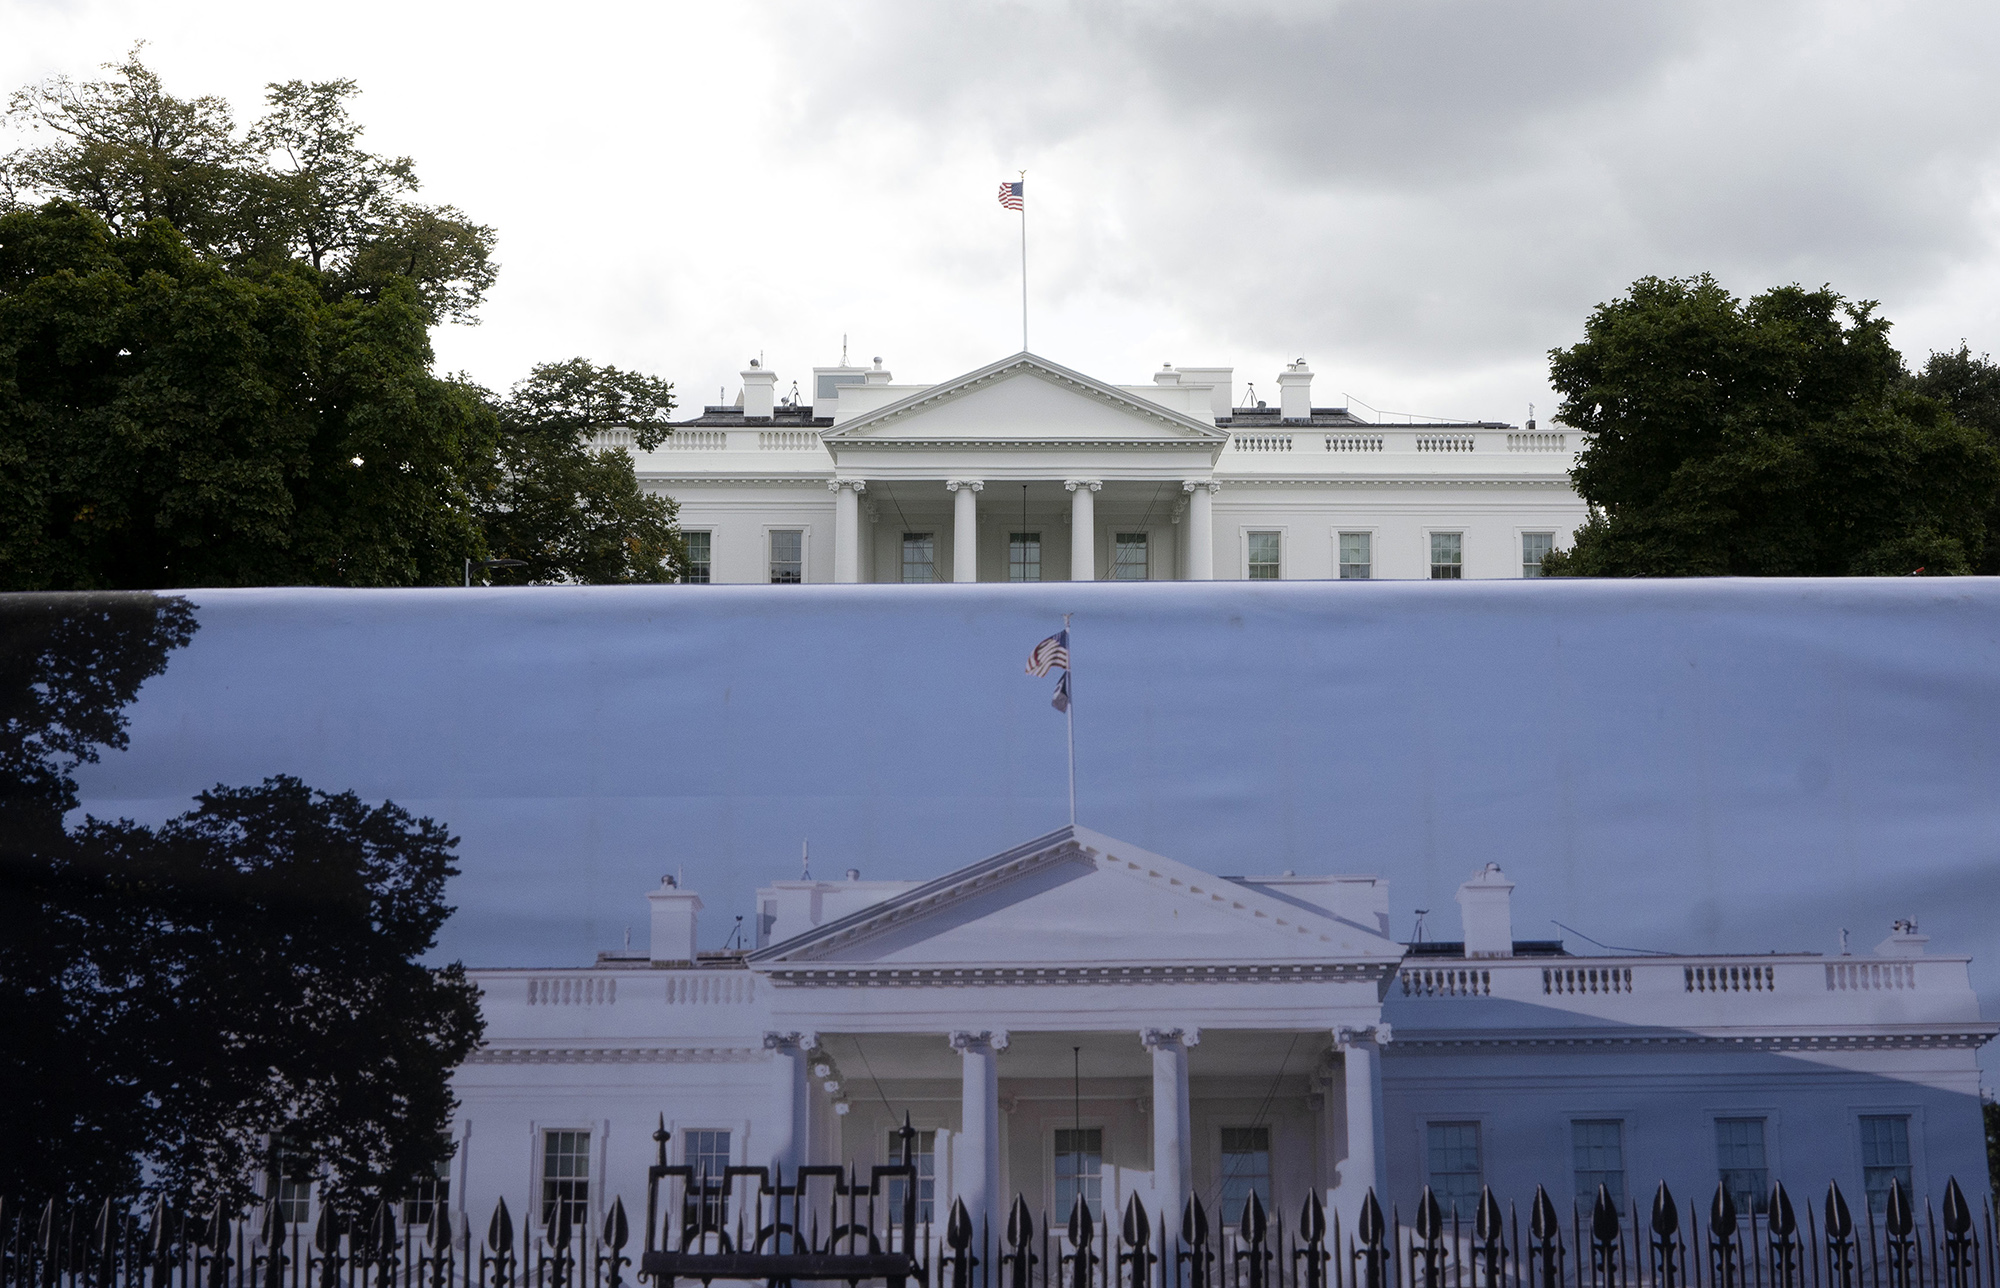 A photograph of the White House is displayed in front of the building in Washington D.C.